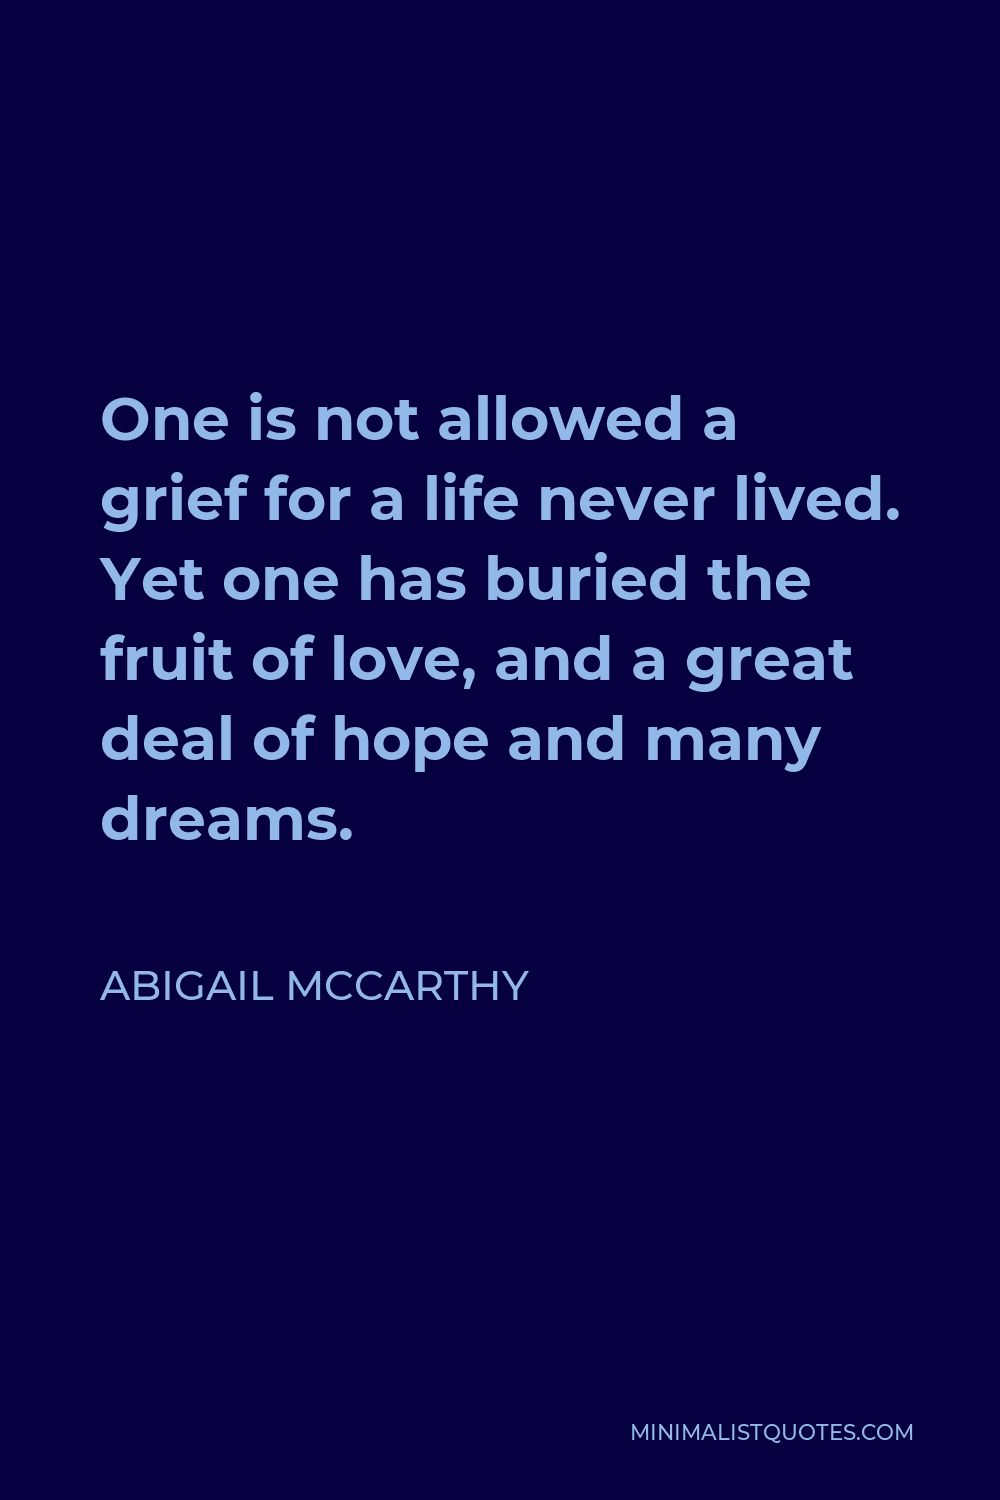 Abigail McCarthy Quote - One is not allowed a grief for a life never lived. Yet one has buried the fruit of love, and a great deal of hope and many dreams.